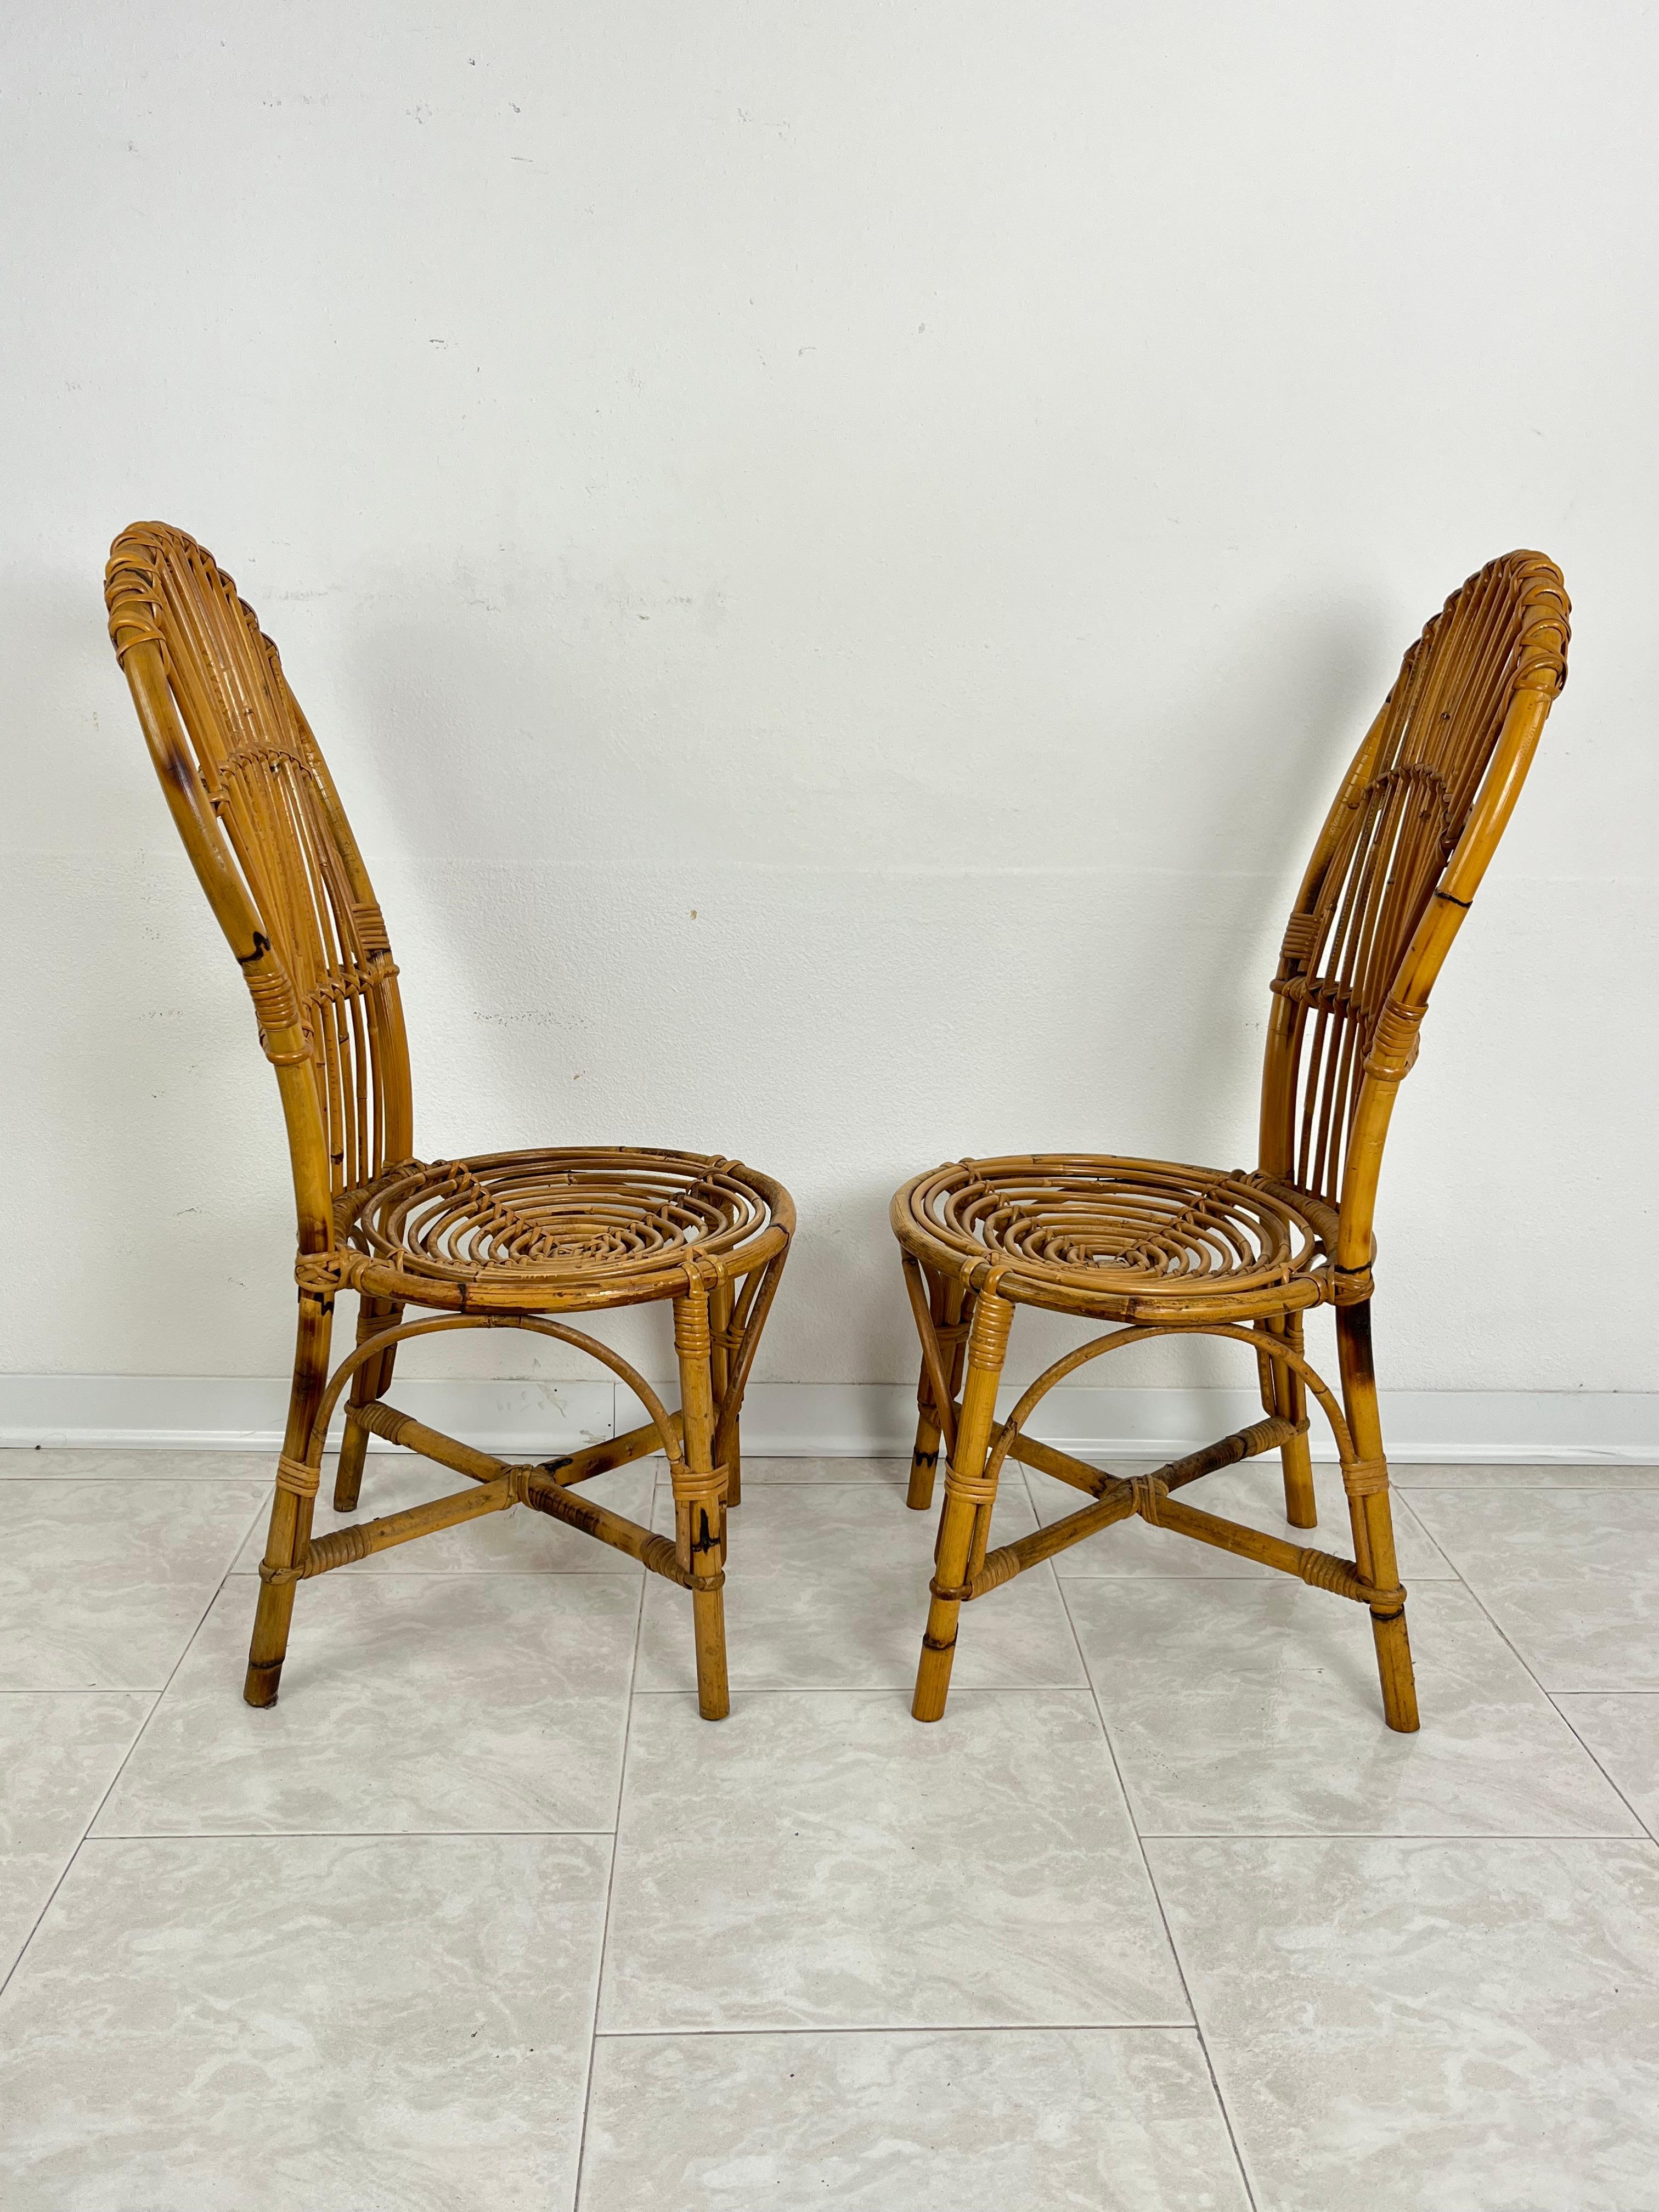 Mid-20th Century Set of 2 Small Mid-Century Bamboo Chairs, Italian Design 1950s For Sale